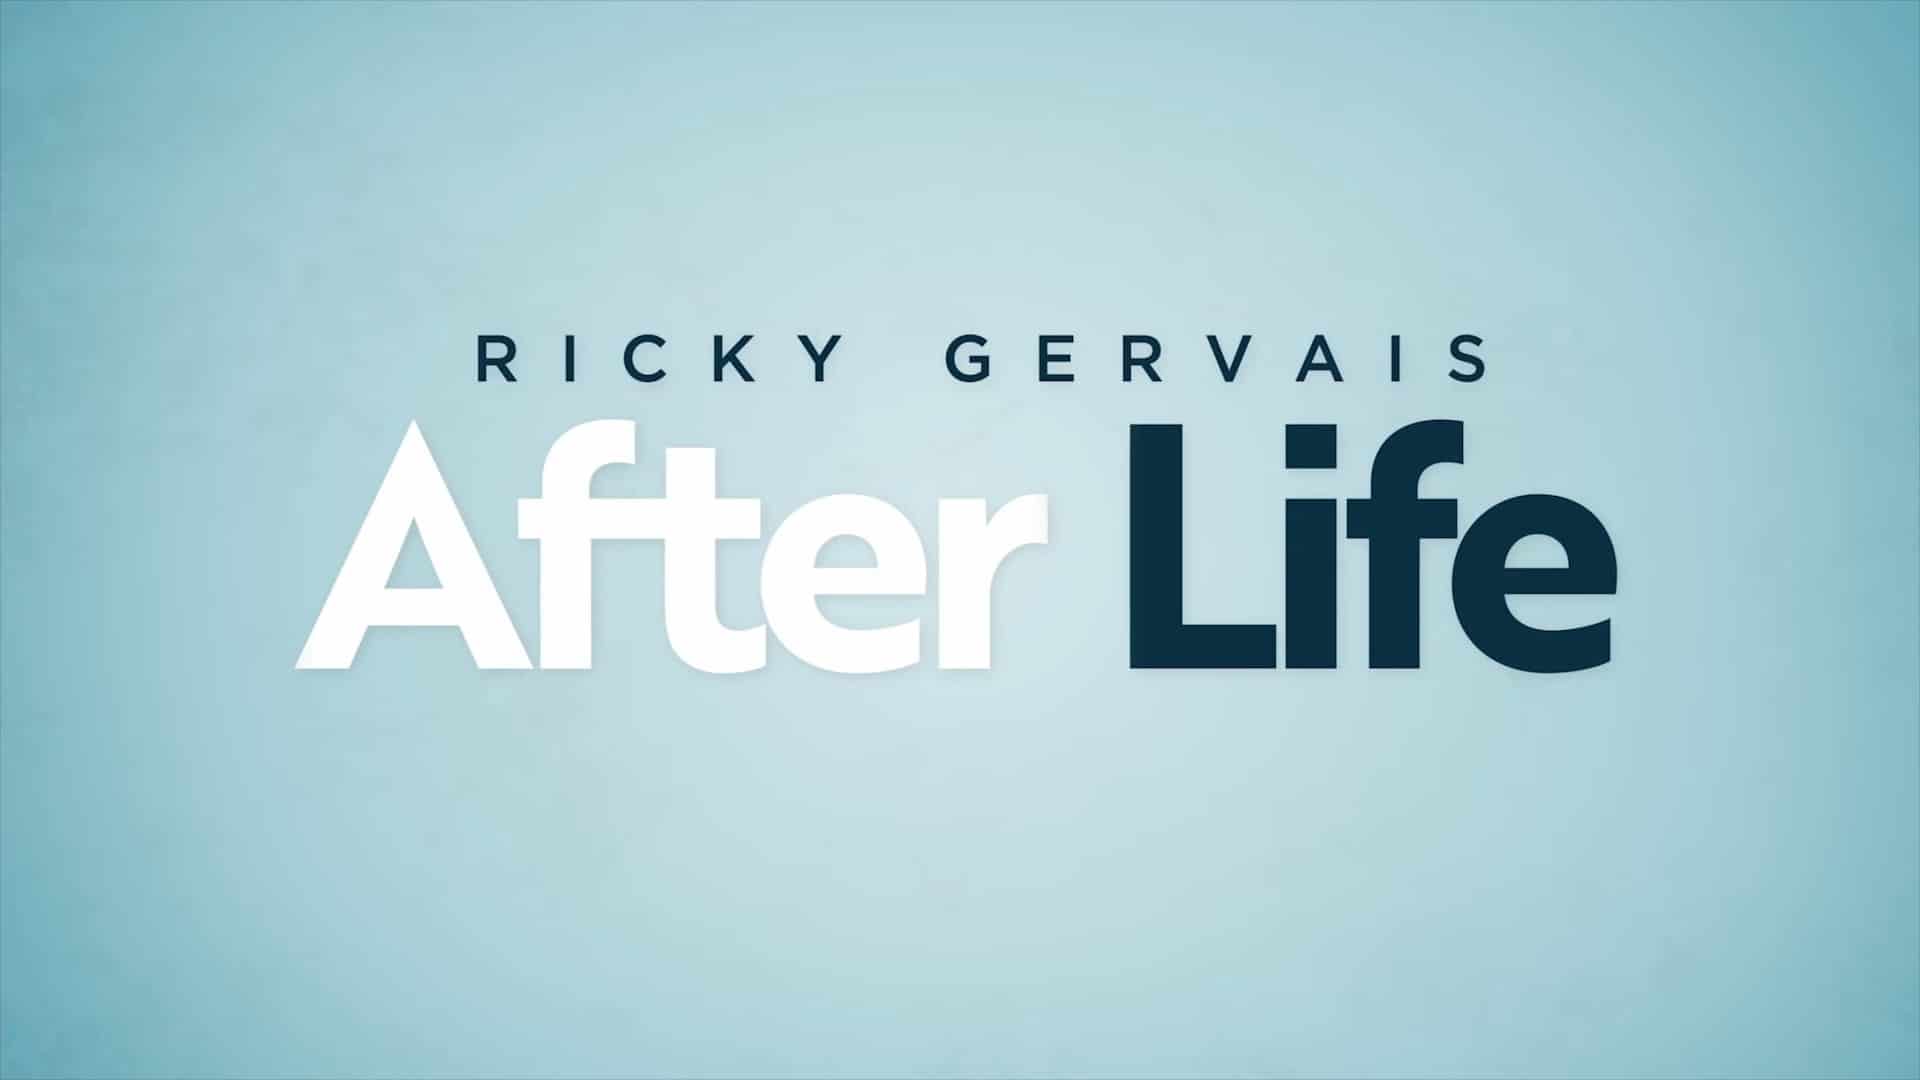 After Life Season 2 Netflix Trailer, Netflix Comedy Series, Ricky Gervais, Coming to Netflix in April 2020